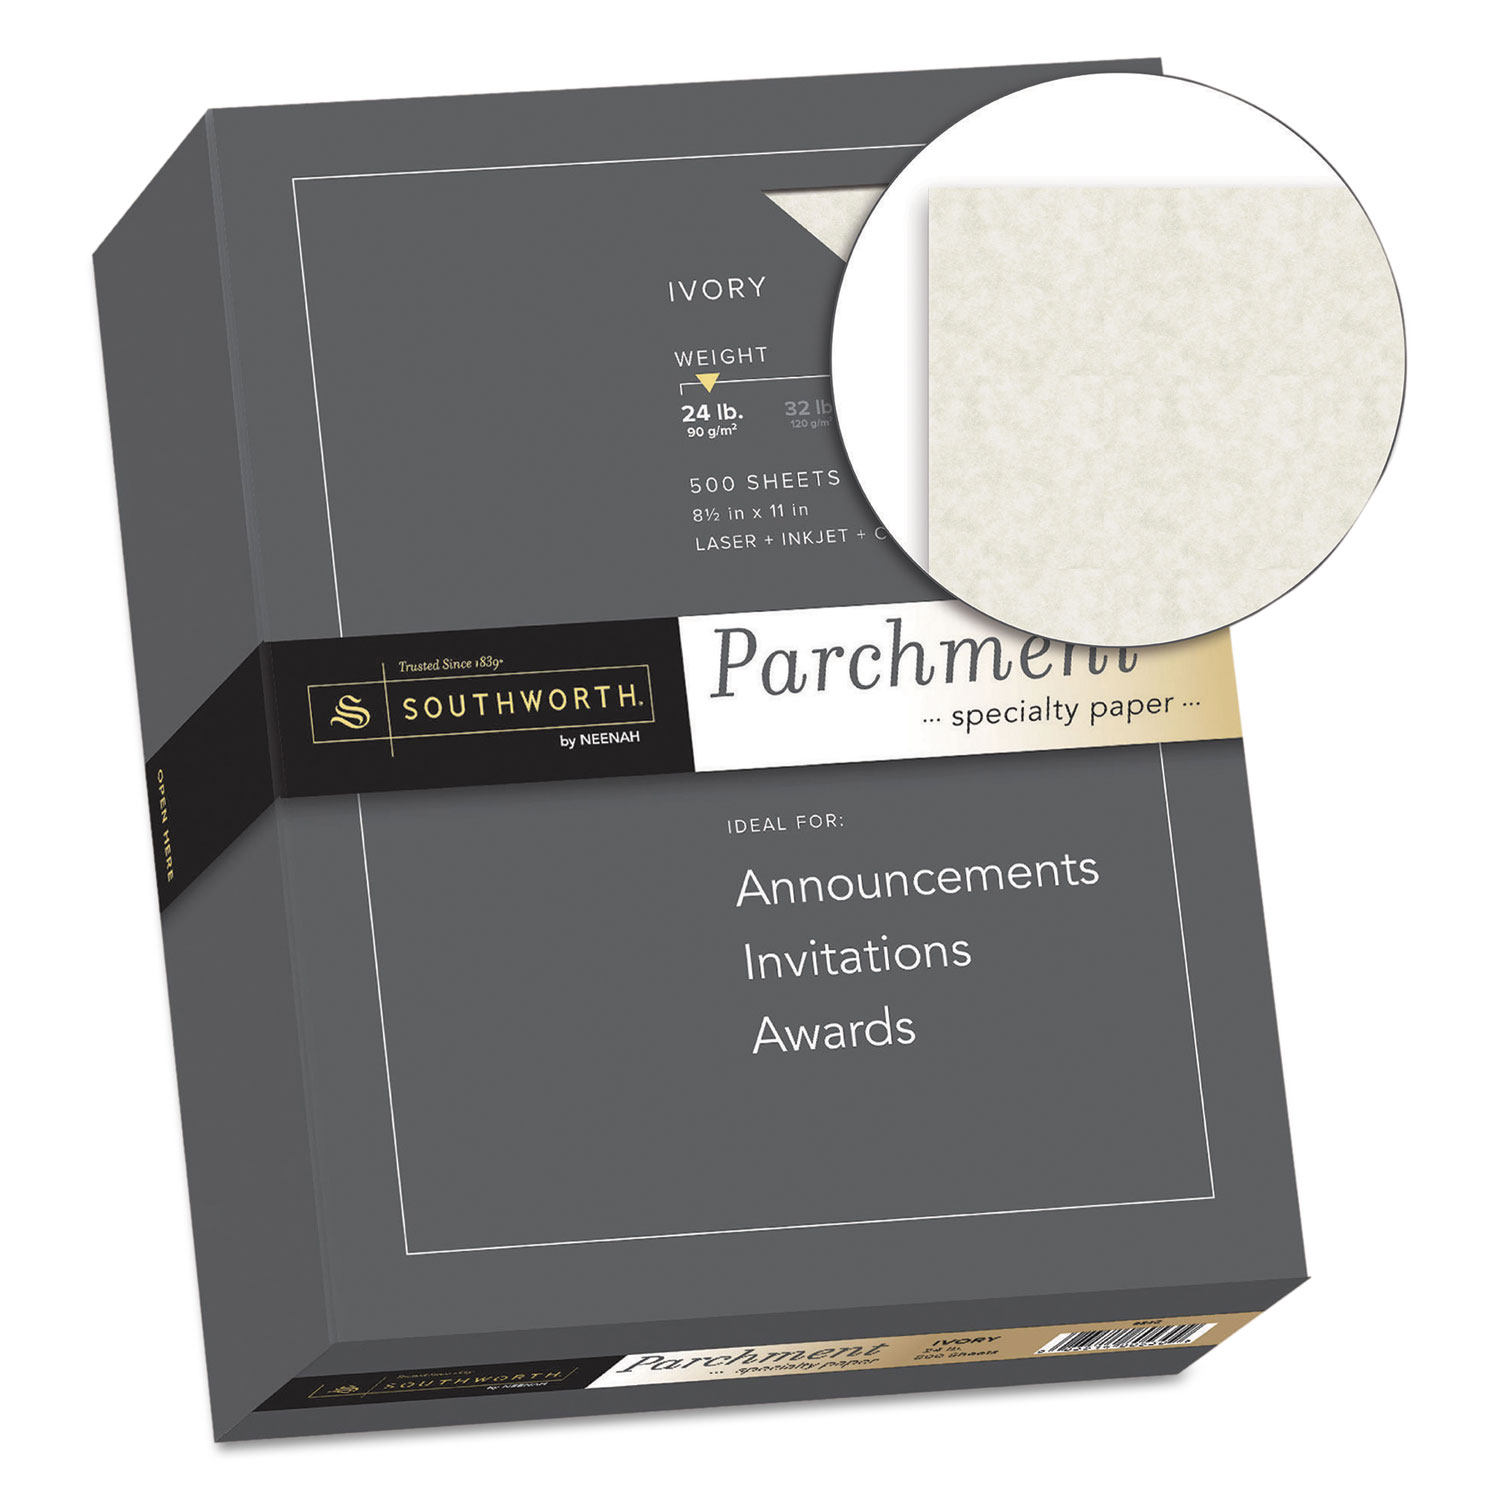 Parchment Specialty Paper, Ivory, 24lb, 8 1/2 x 11, 500 Sheets